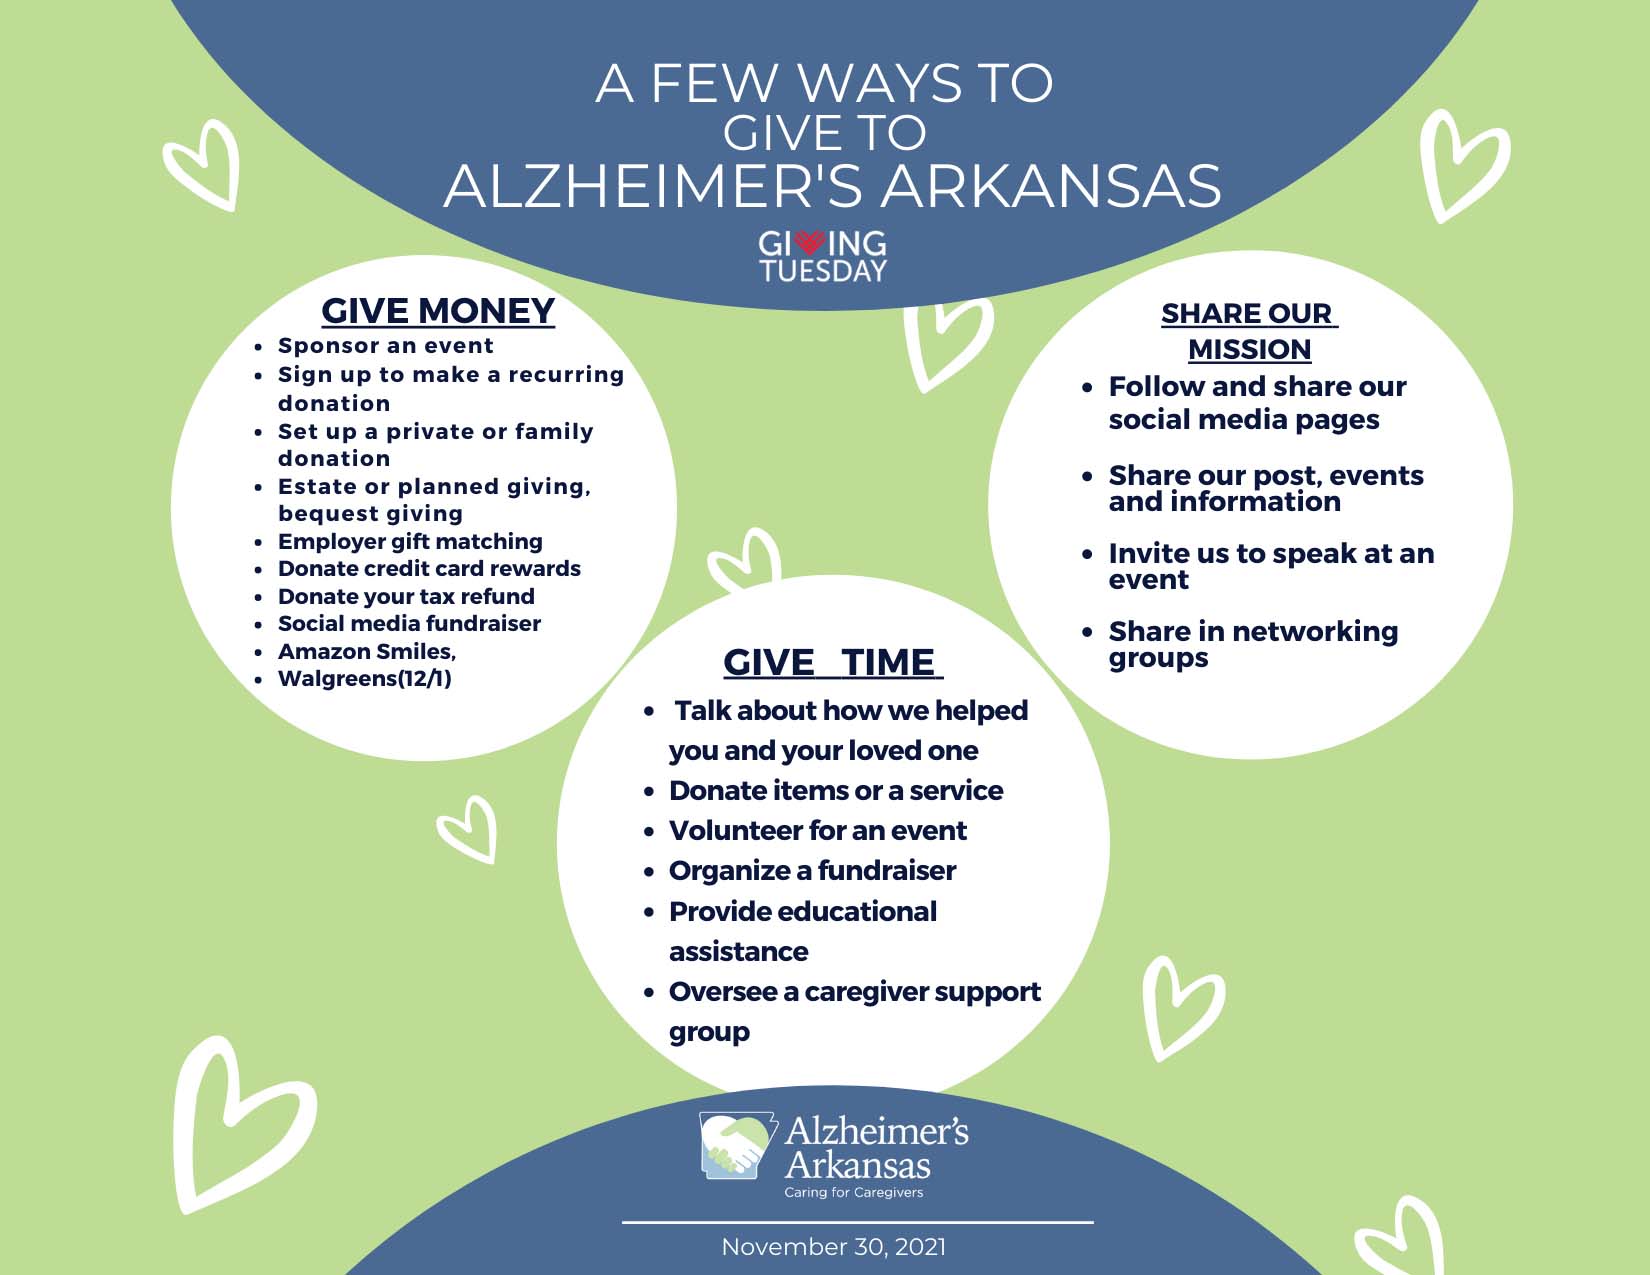 Give to Alzheimer's Arkansas on Giving Tuesday!